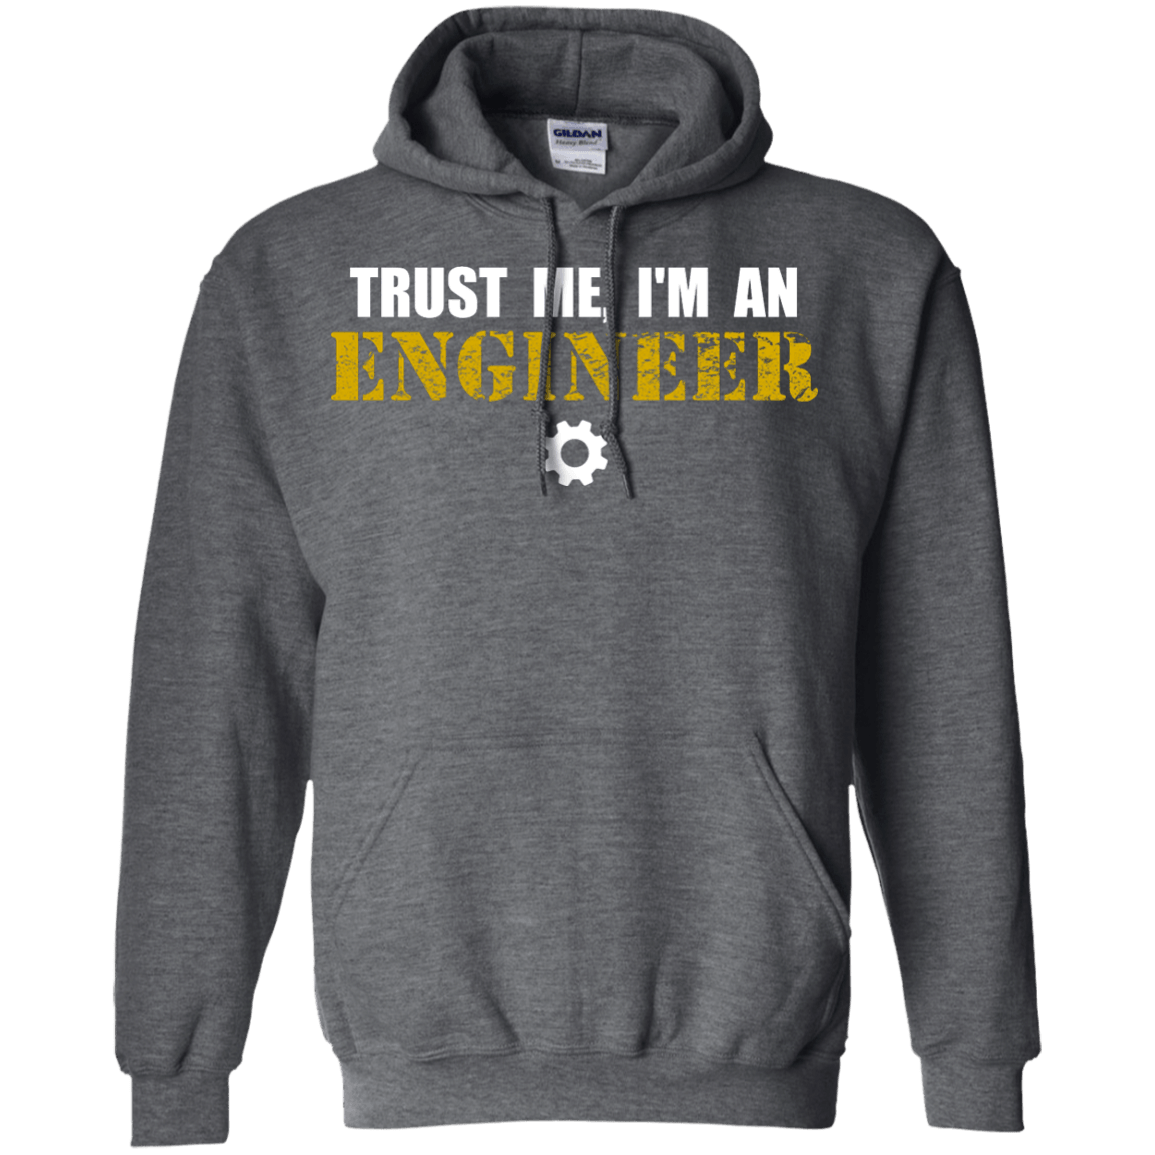 Trust Me, I'm An Engineer - Engineering Outfitters